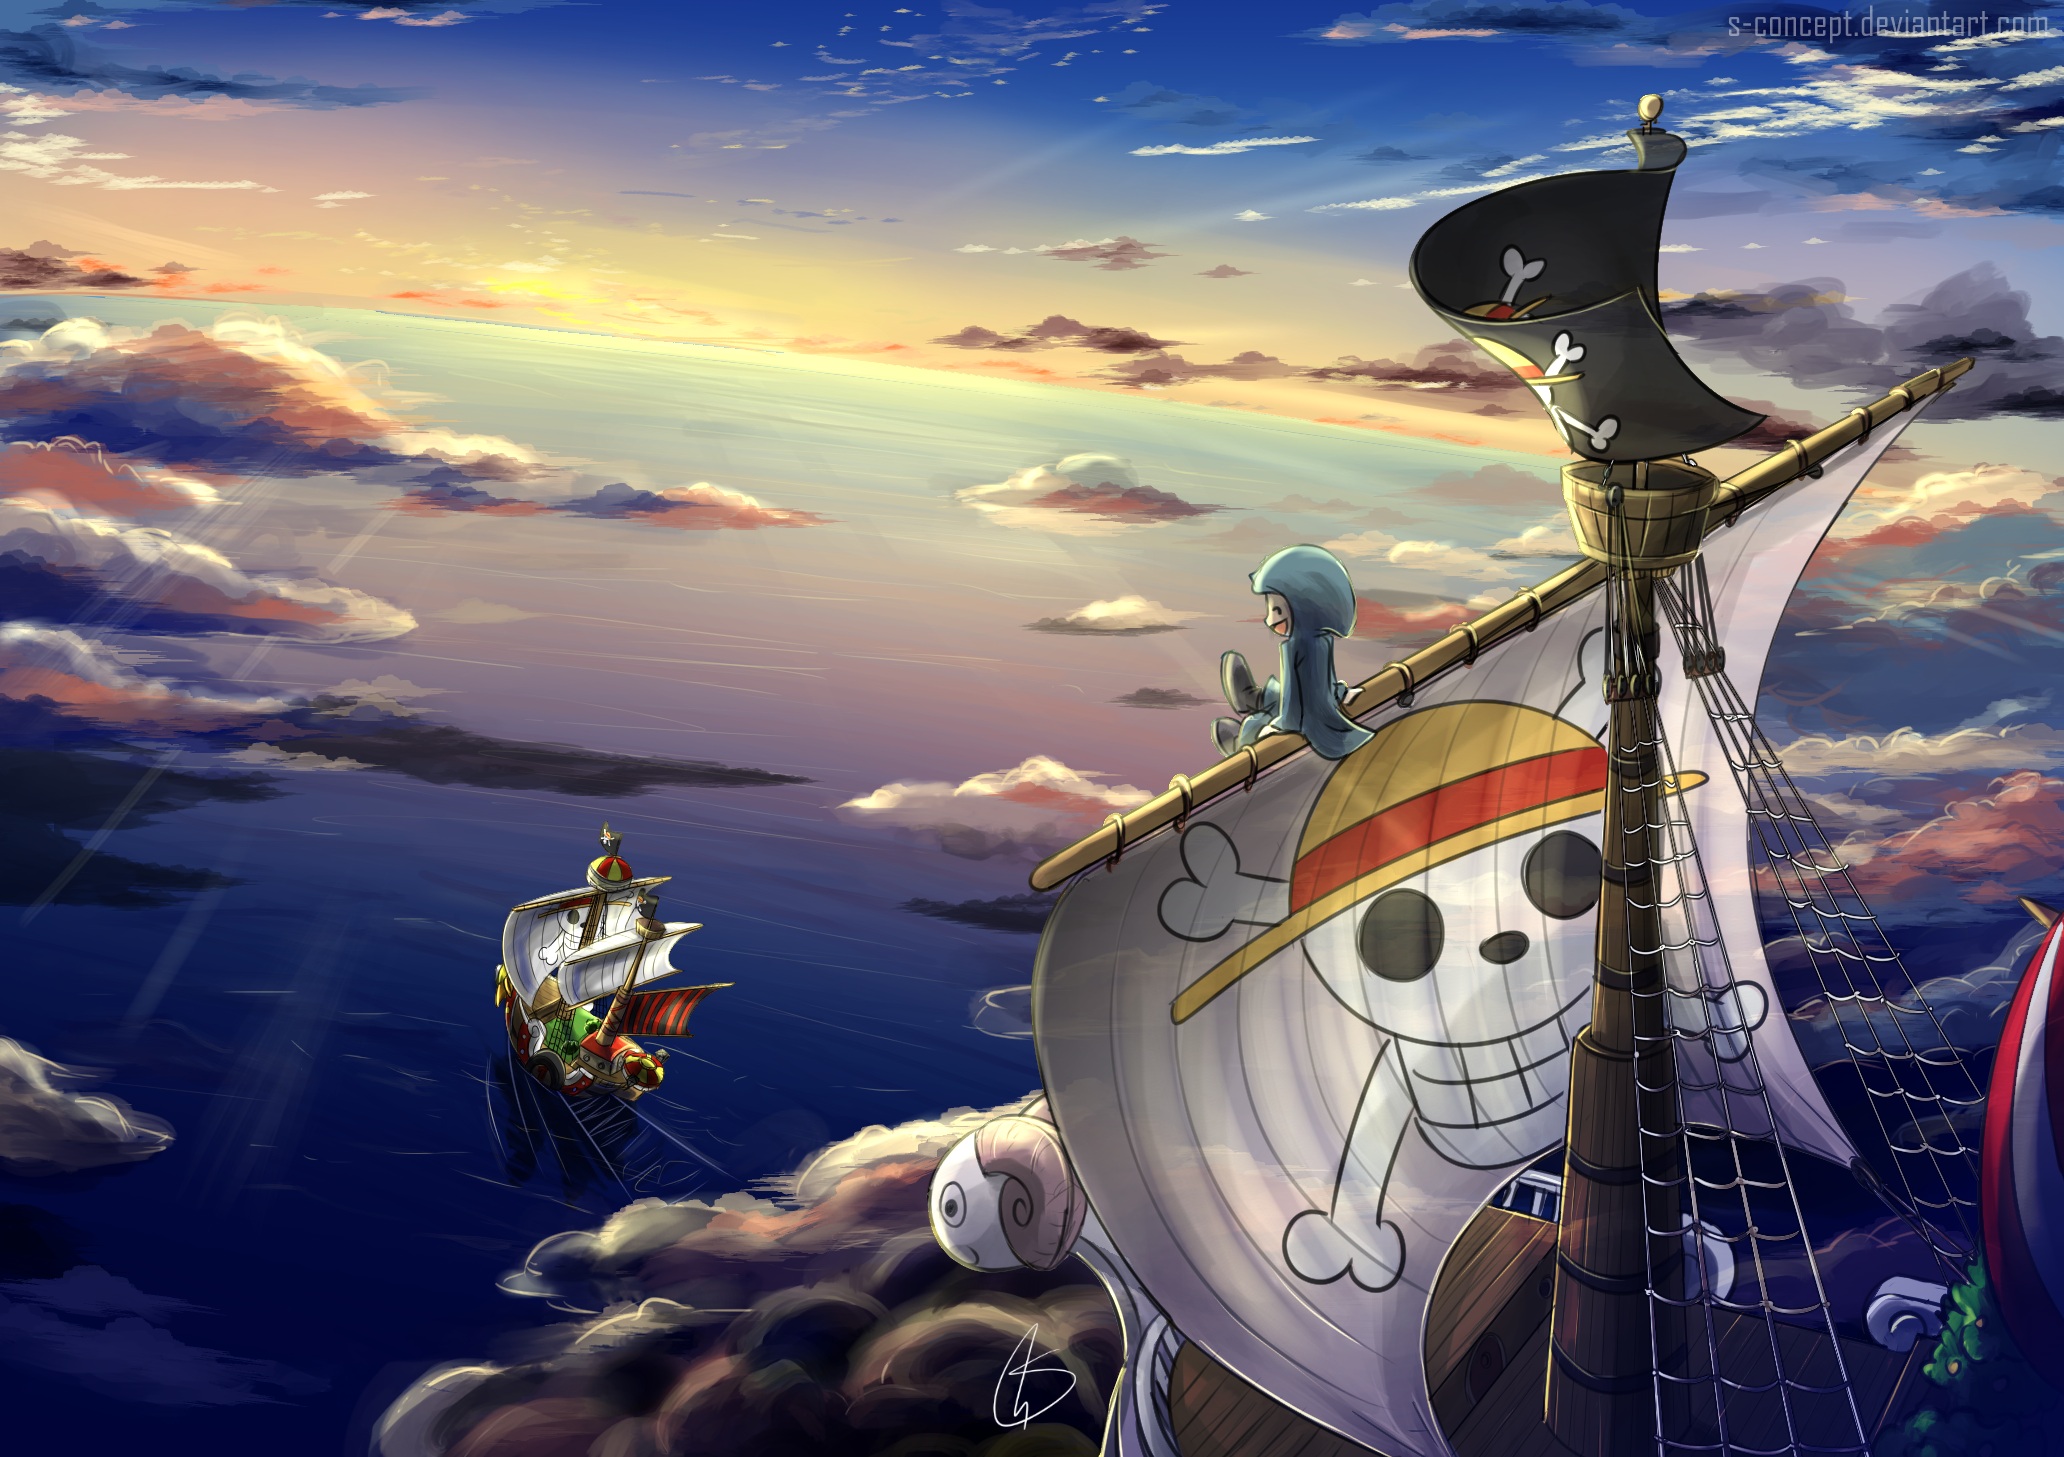 Anime One Piece HD Wallpaper by S-concept